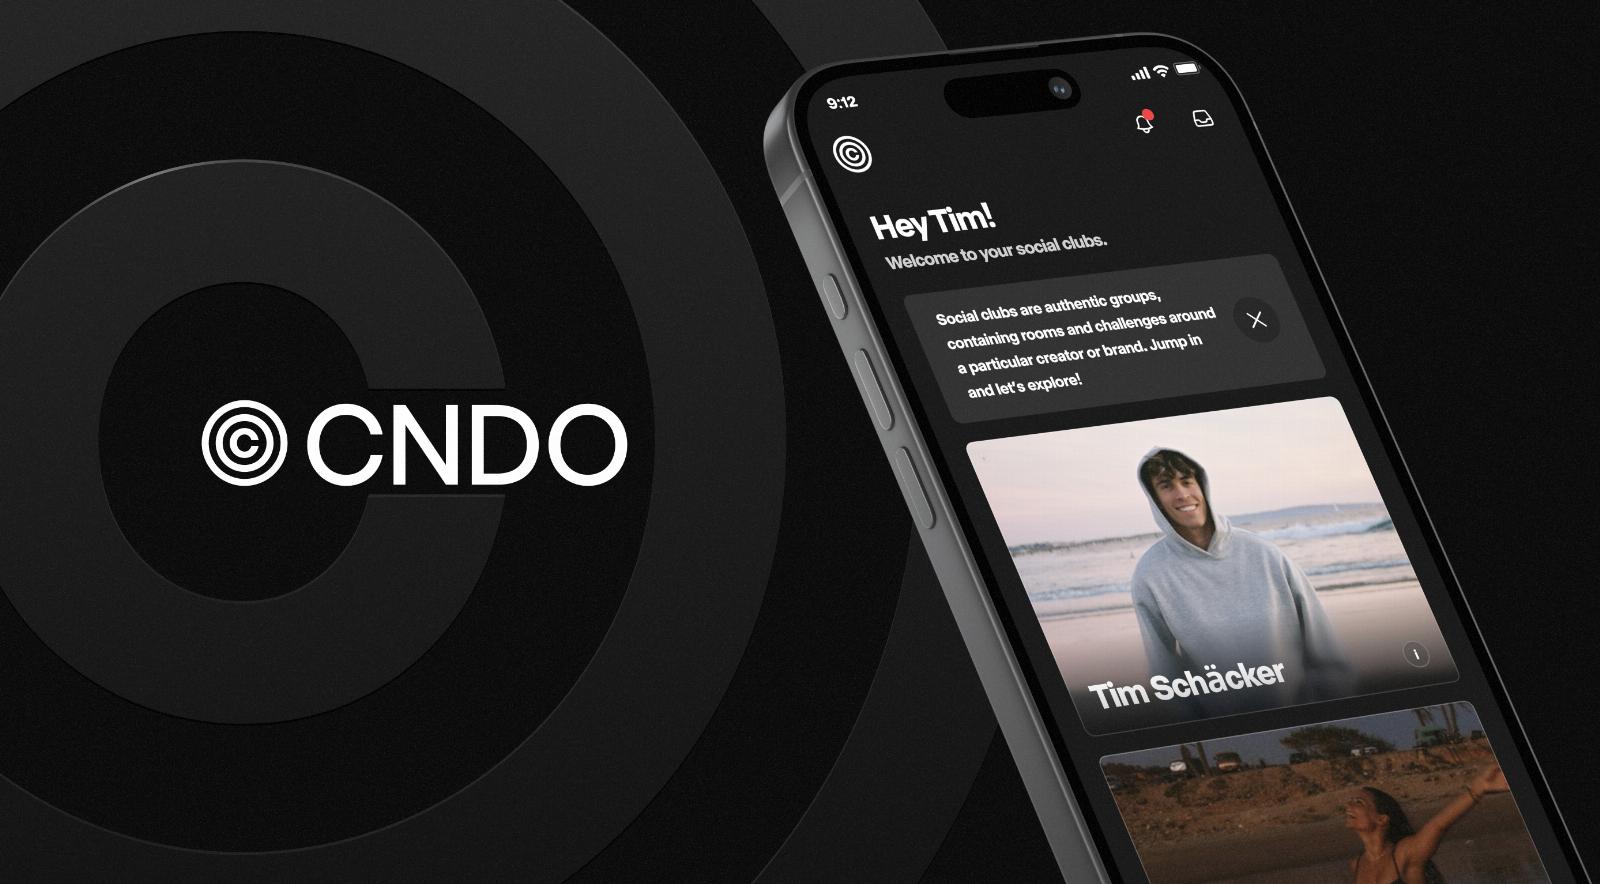 CNDO is a new ‘challenge-based’ social networking for creators and fans